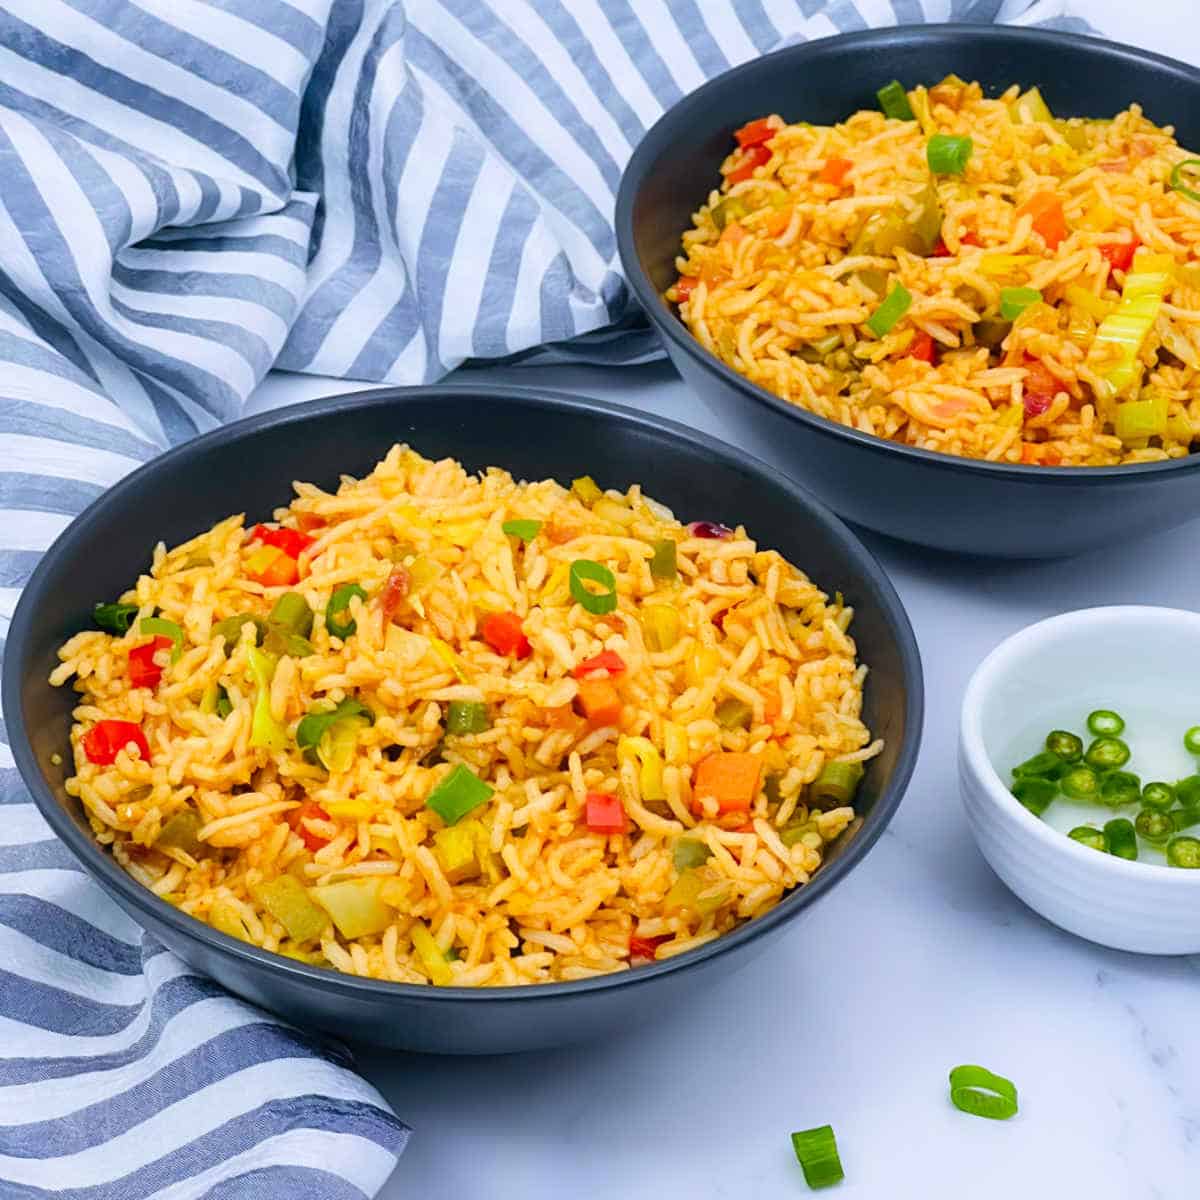 Vegetable fried rice served with chili vinegar.